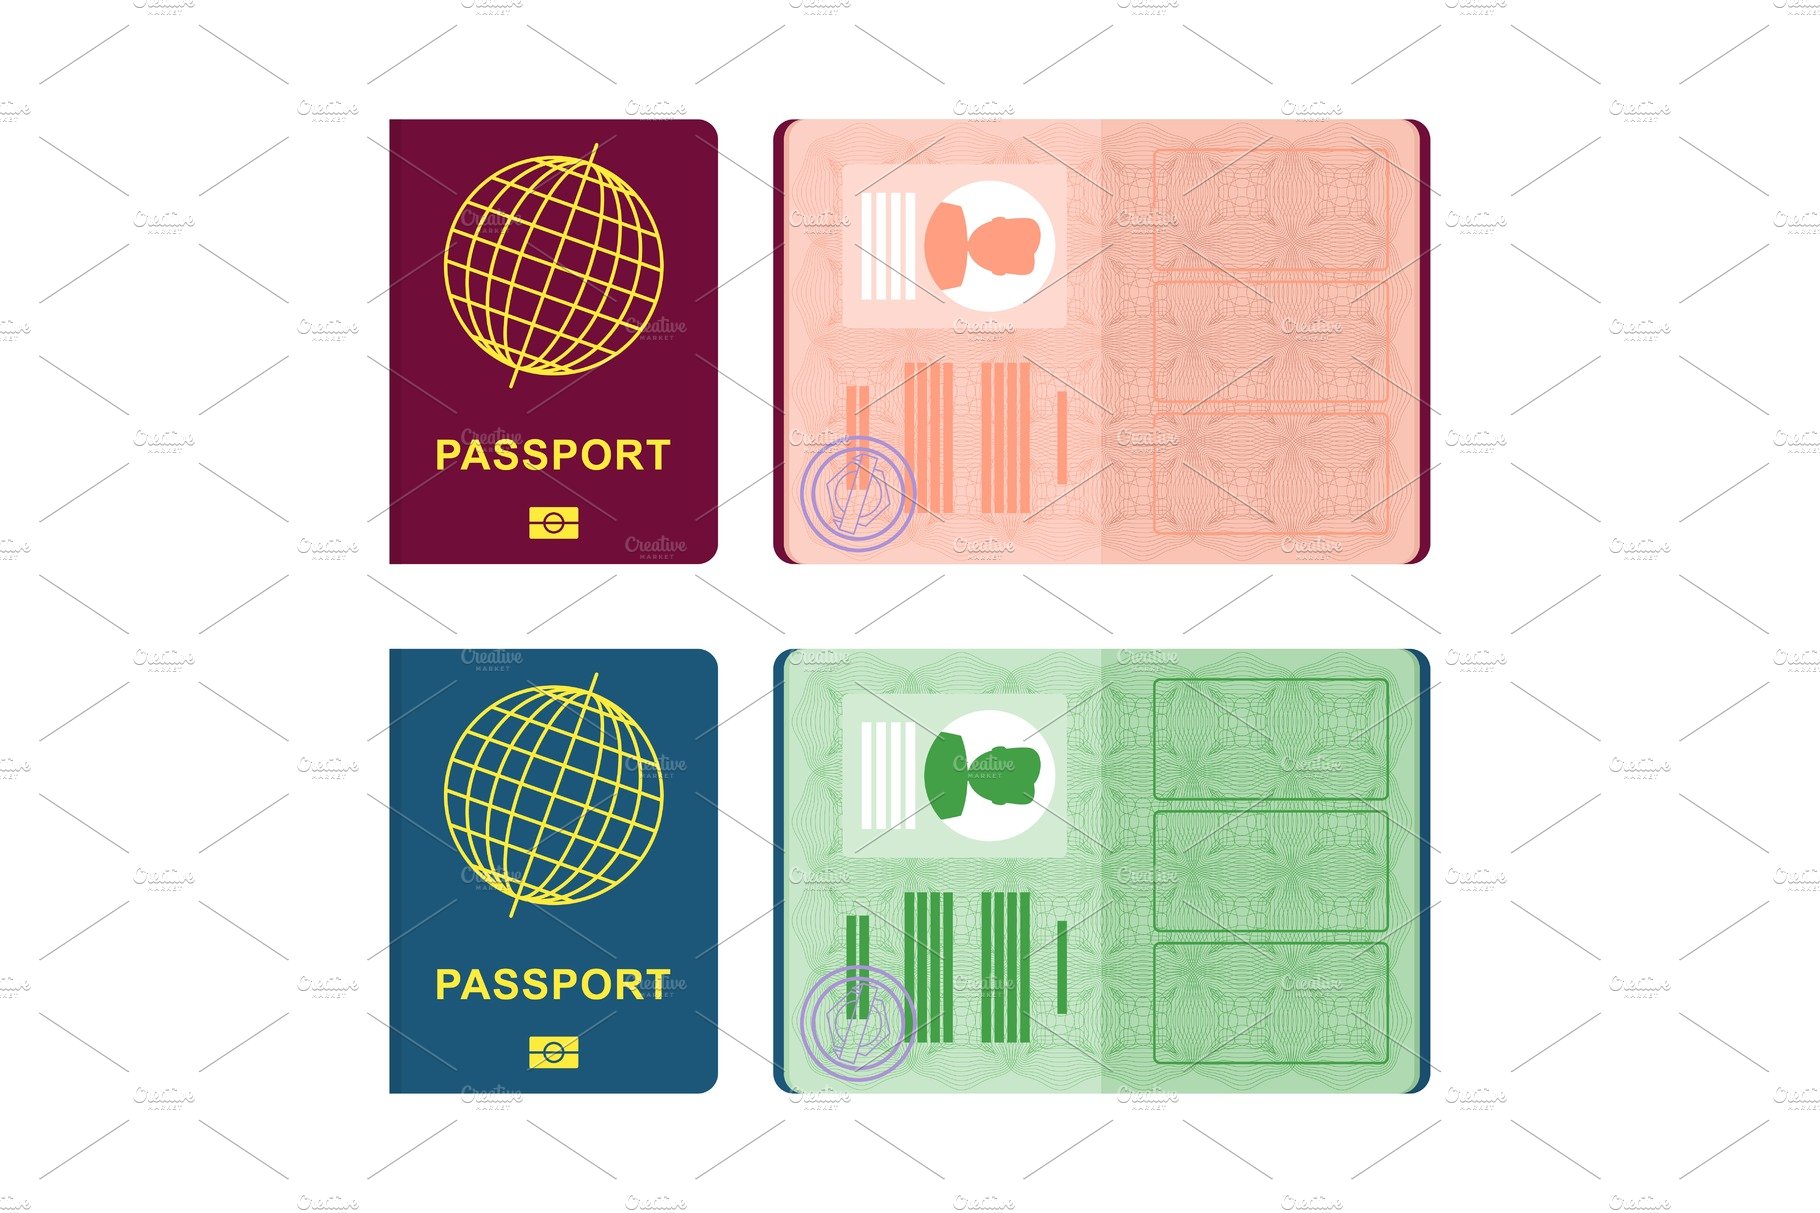 passport cover and spread cover image.